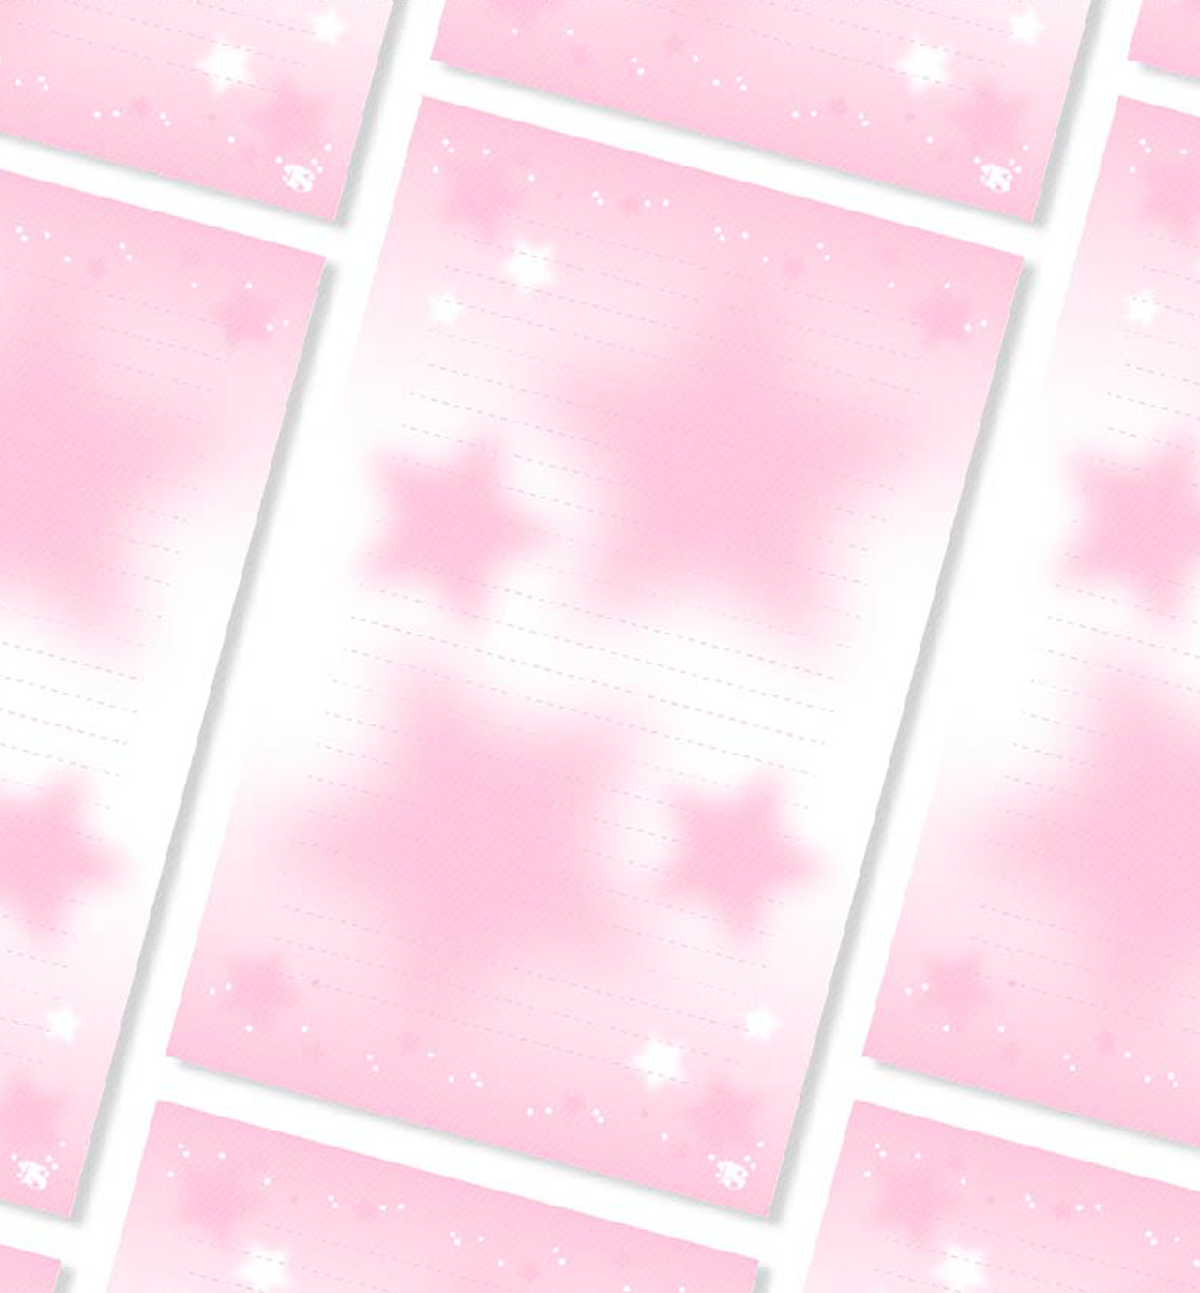 A6 Star Note Paper Refill [Pink]